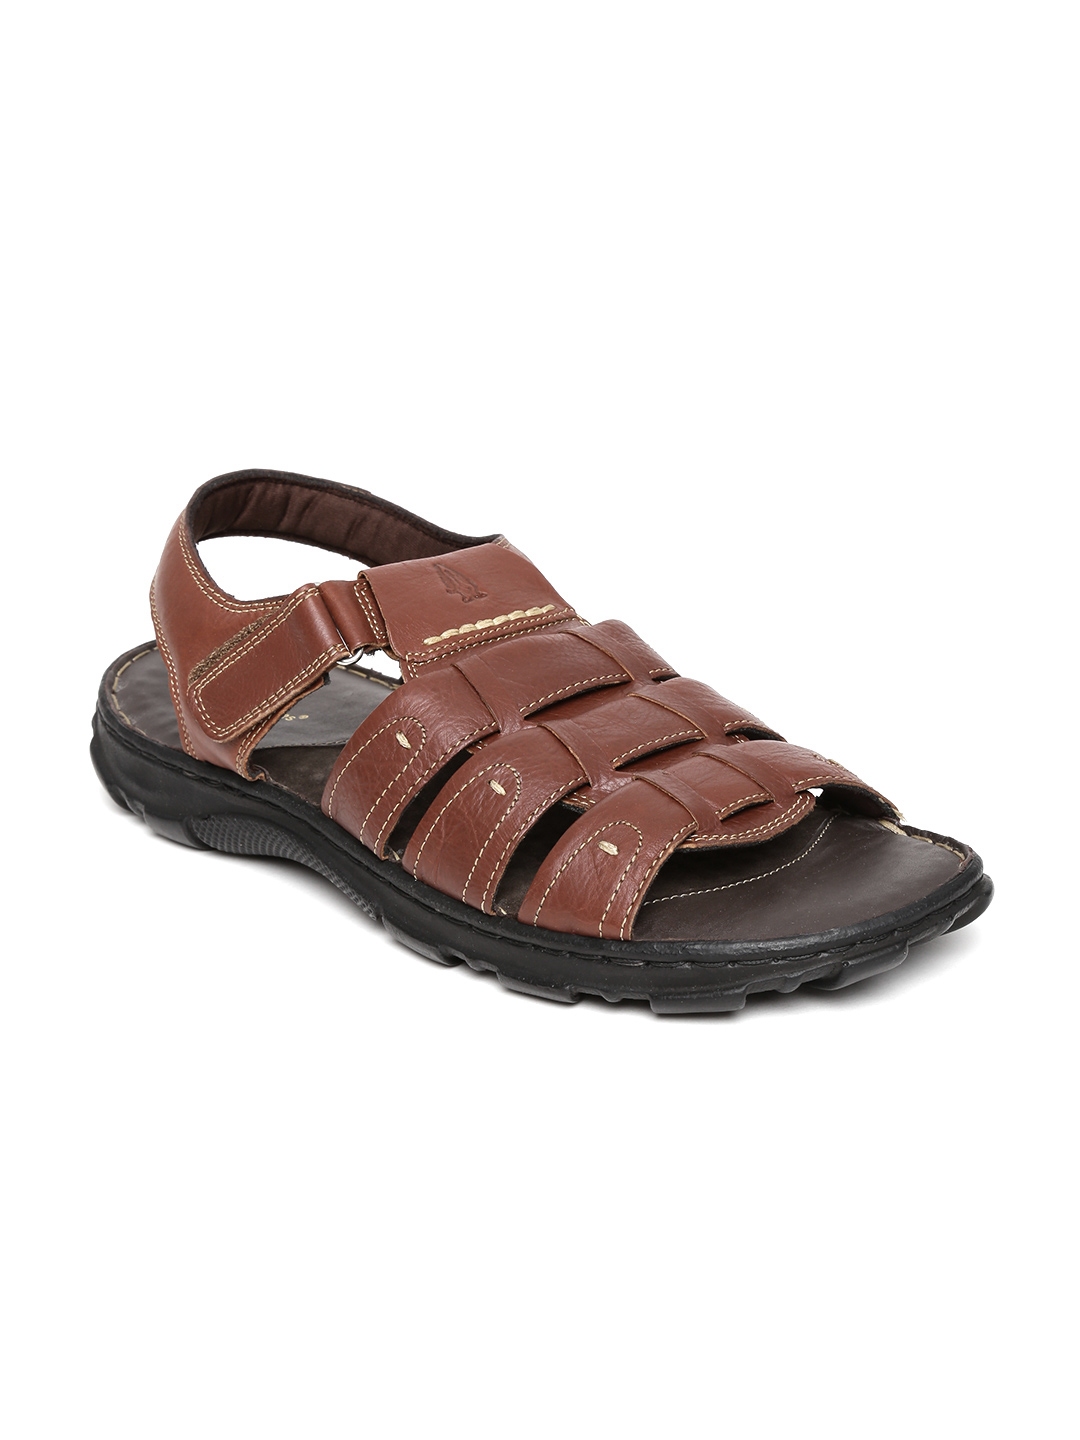 Buy Hush Puppies By Bata Men Brown Leather Sandals - Sandals for Men ...